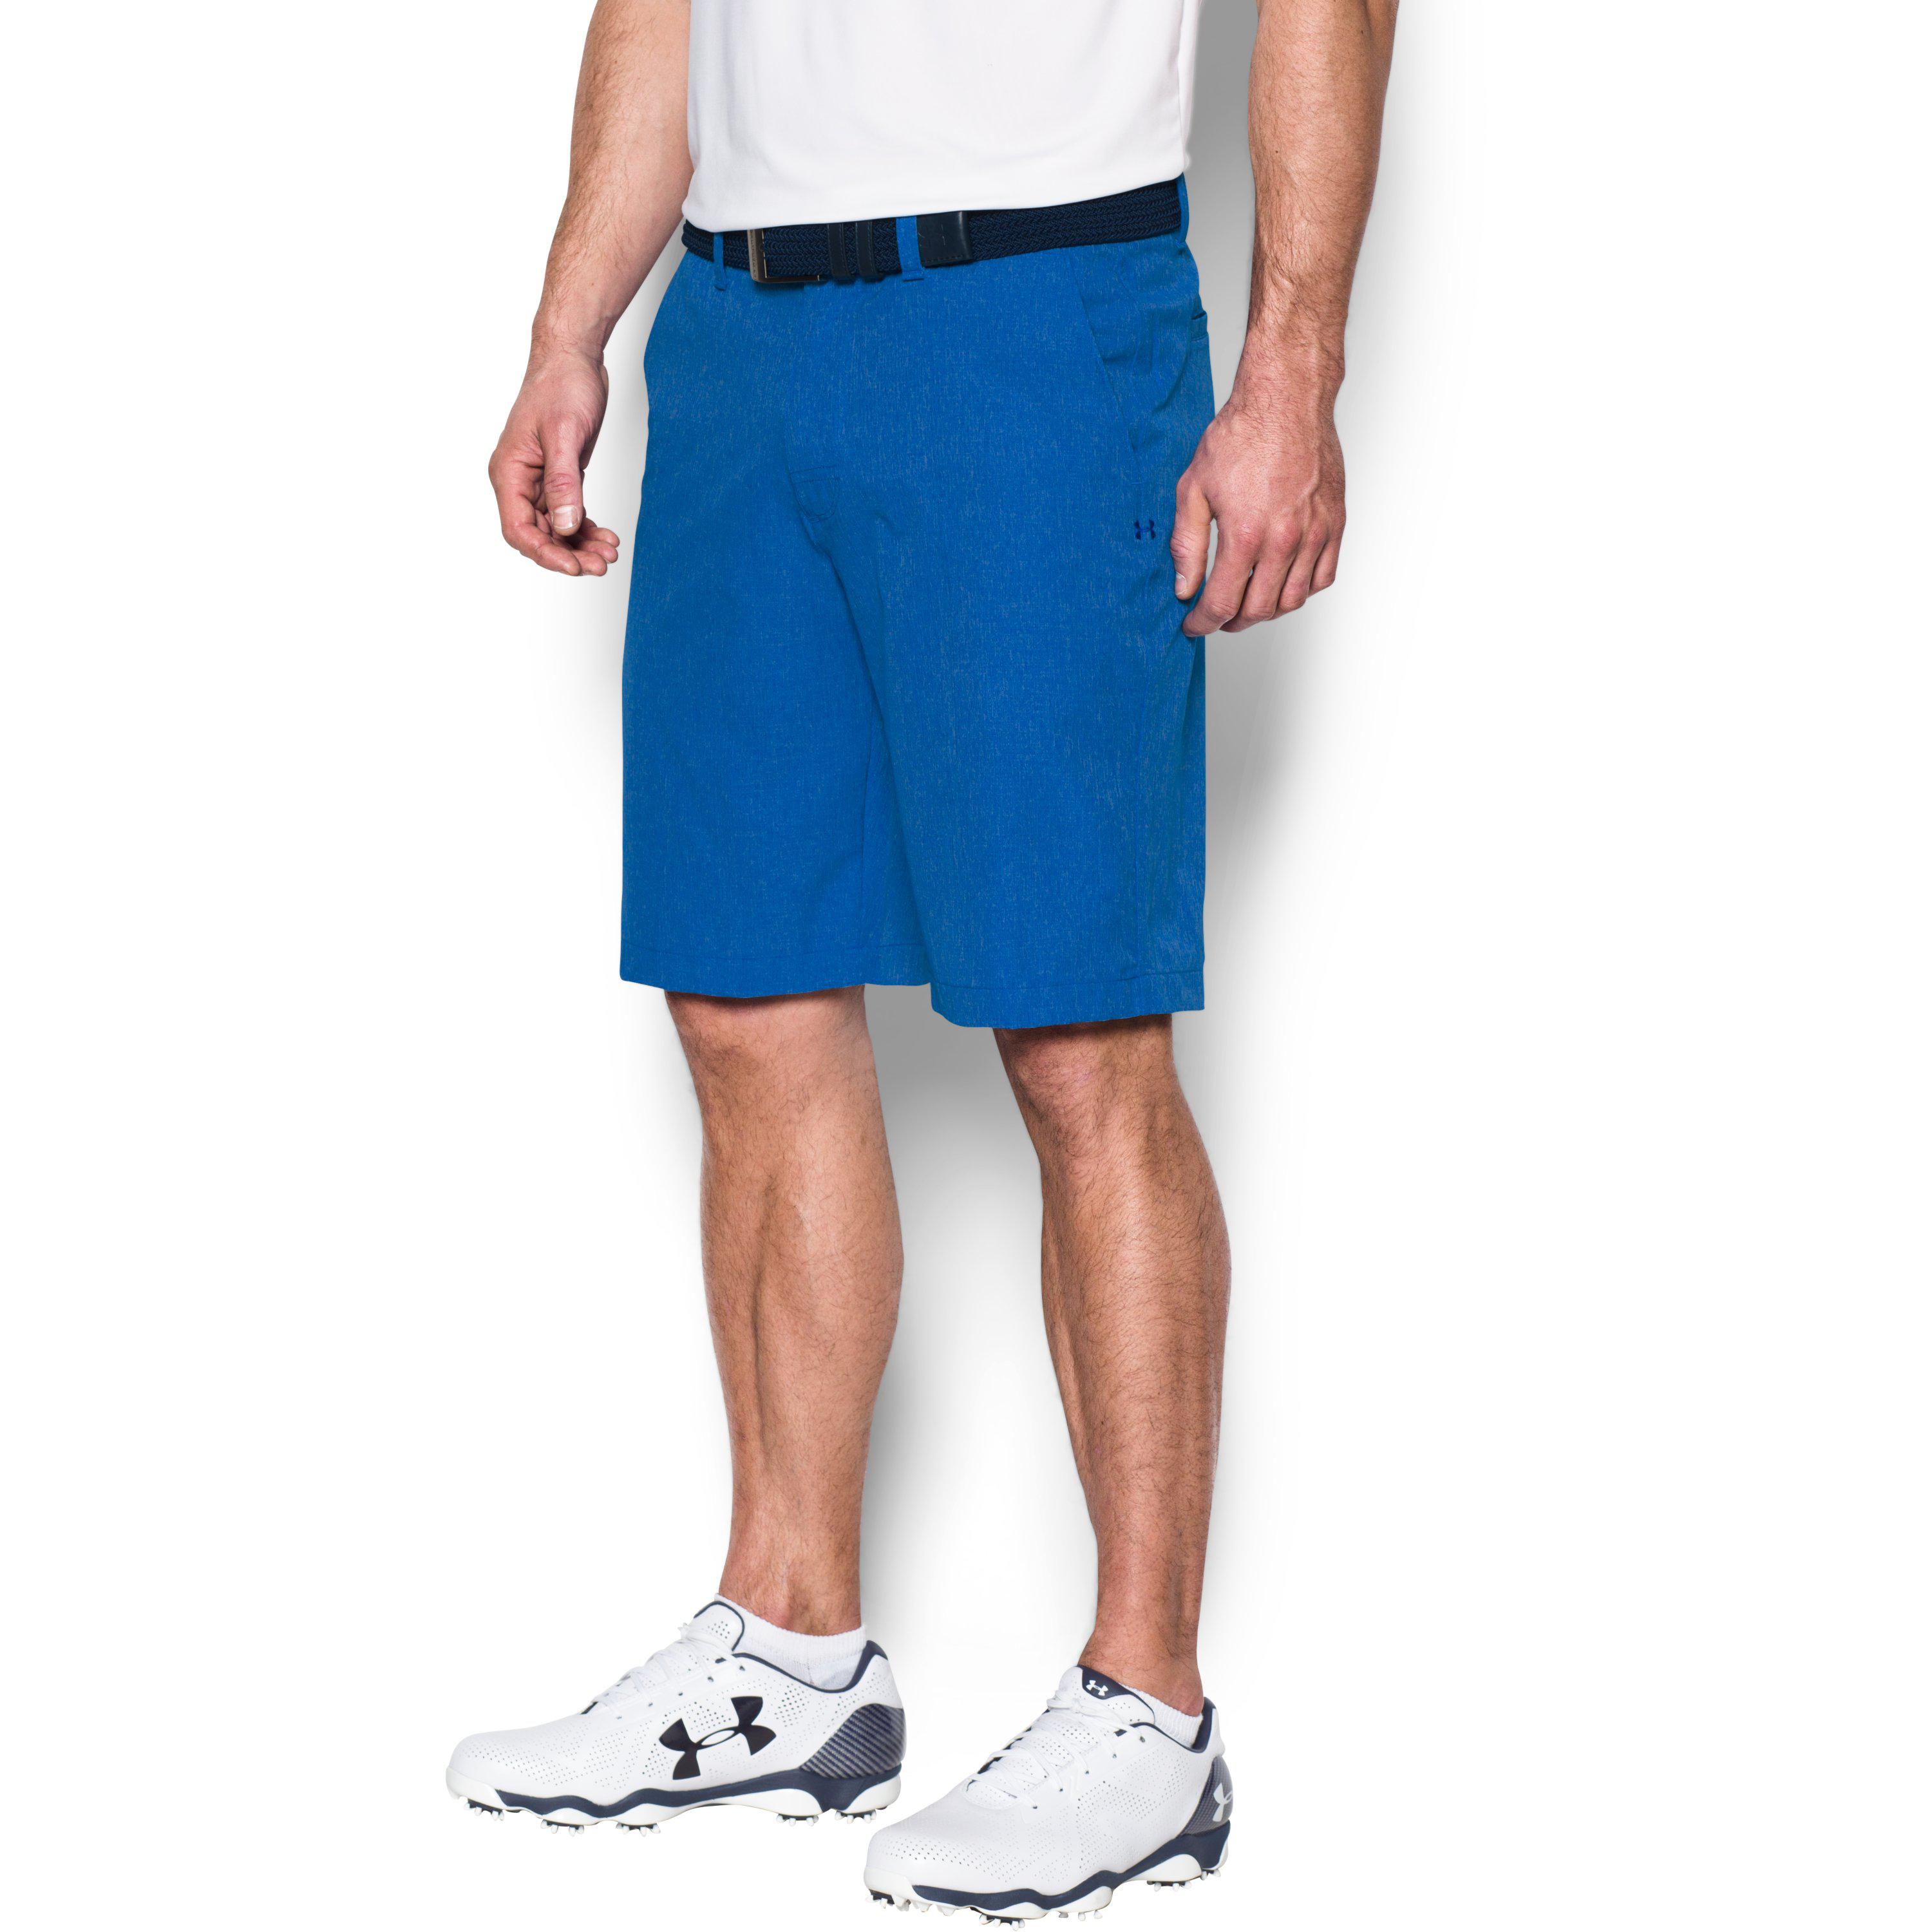 Under Armour Men's Ua Match Play Vented Shorts in Blue for Men - Lyst